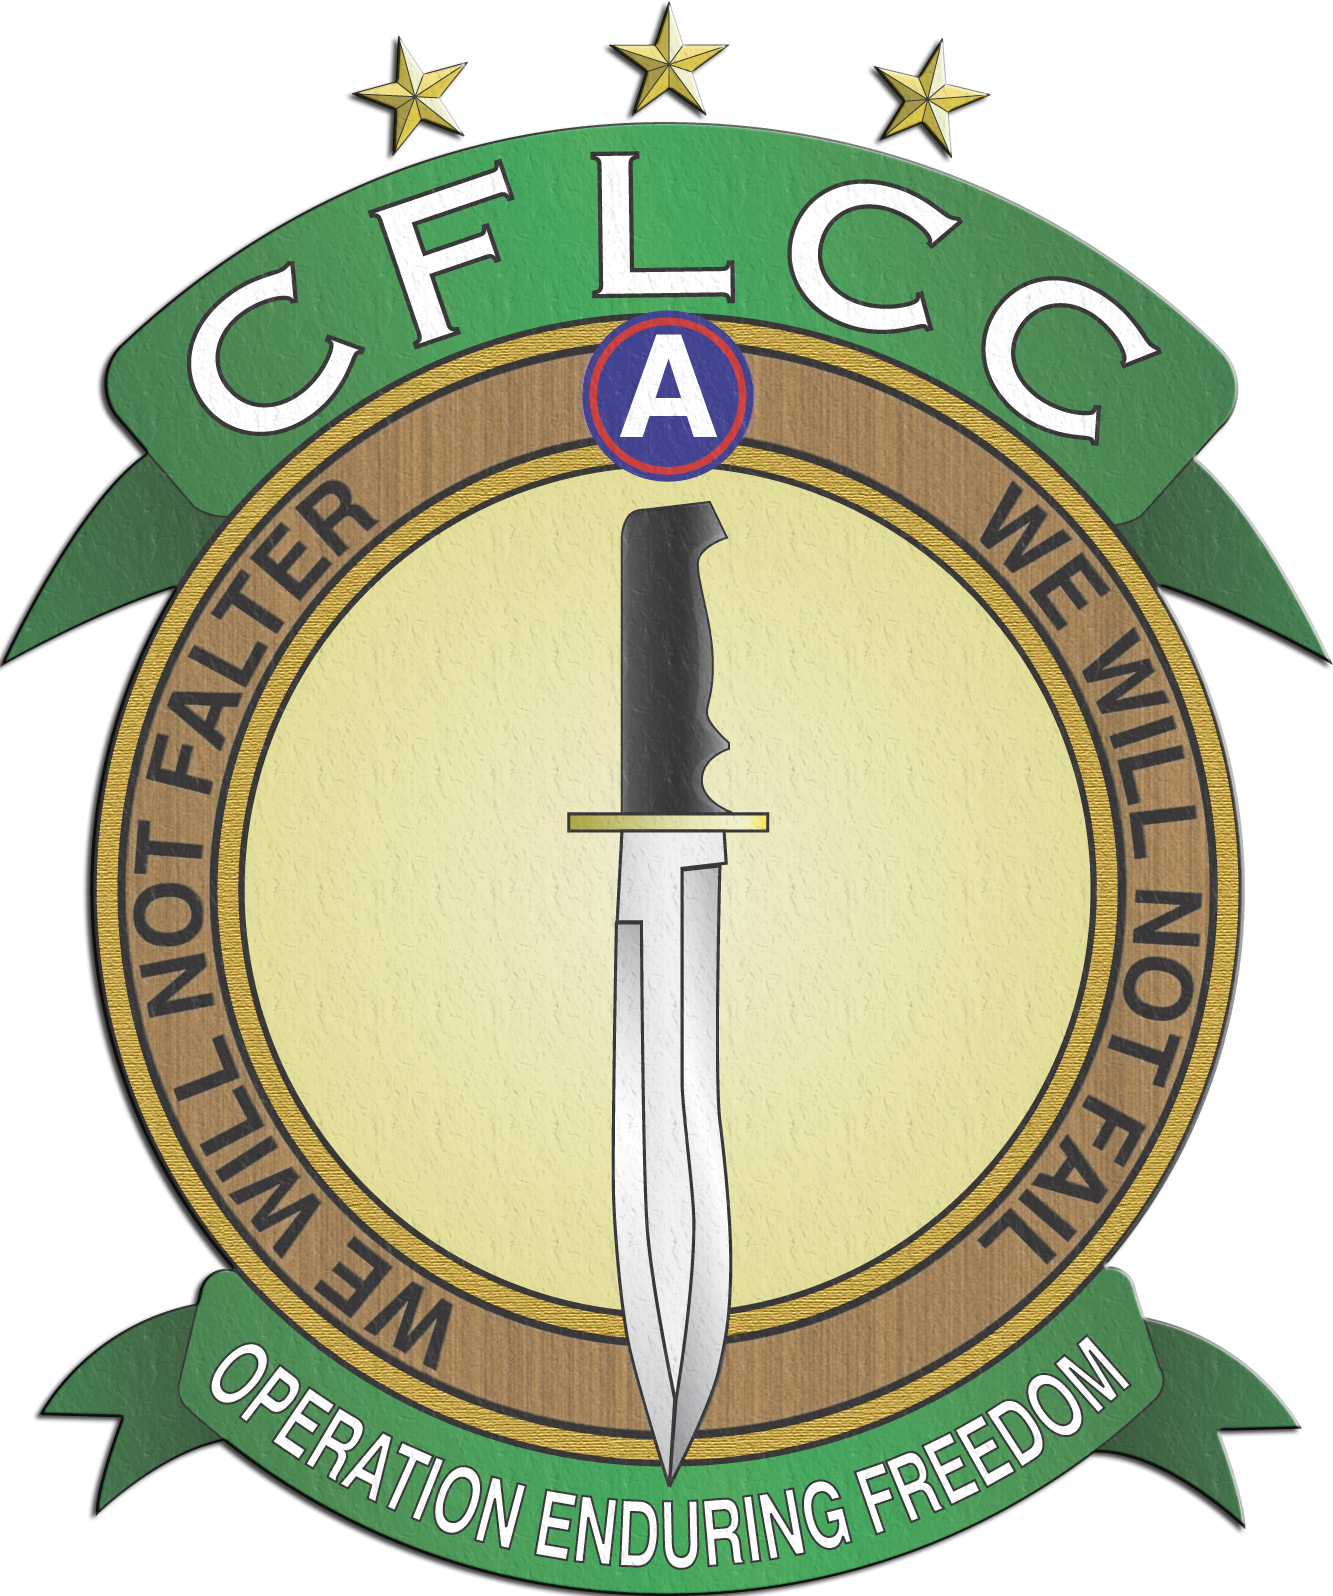 CFLCC Logo Decal, Military And Service Decals, Marines Corps ...